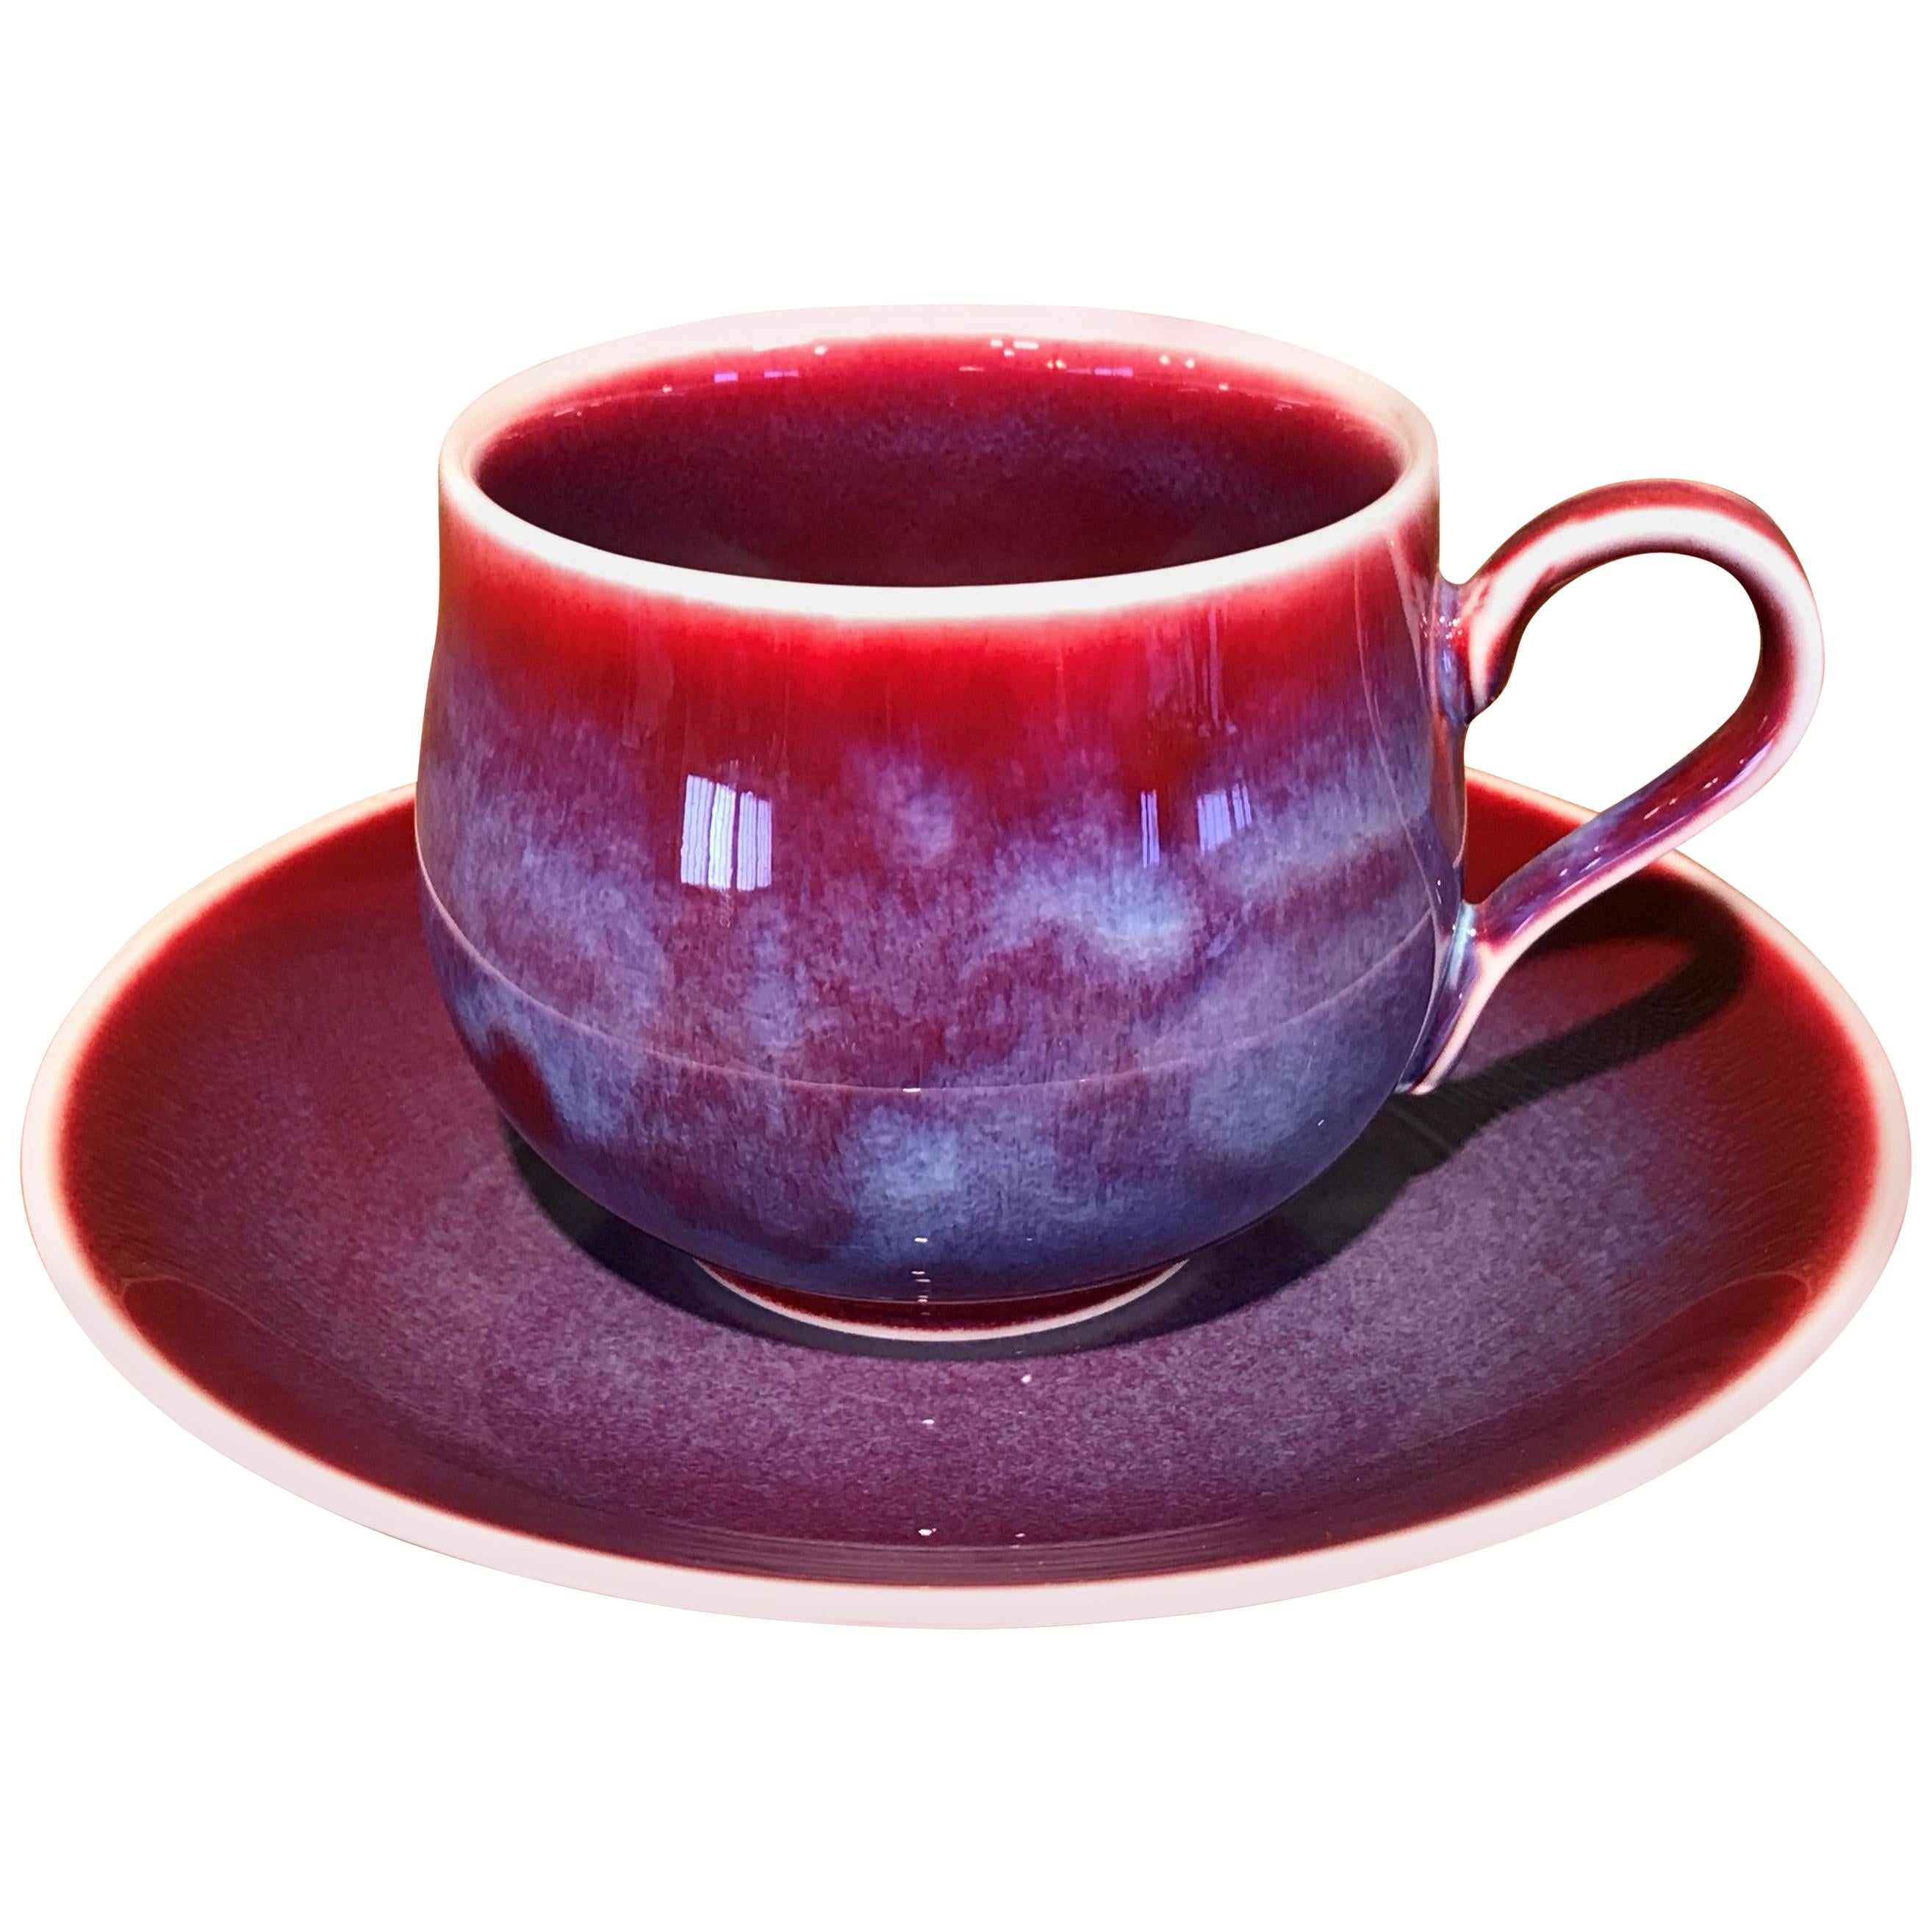 Japanese Red Hand-Glazed Porcelain Cup and Saucer by Contemporary Master Artist